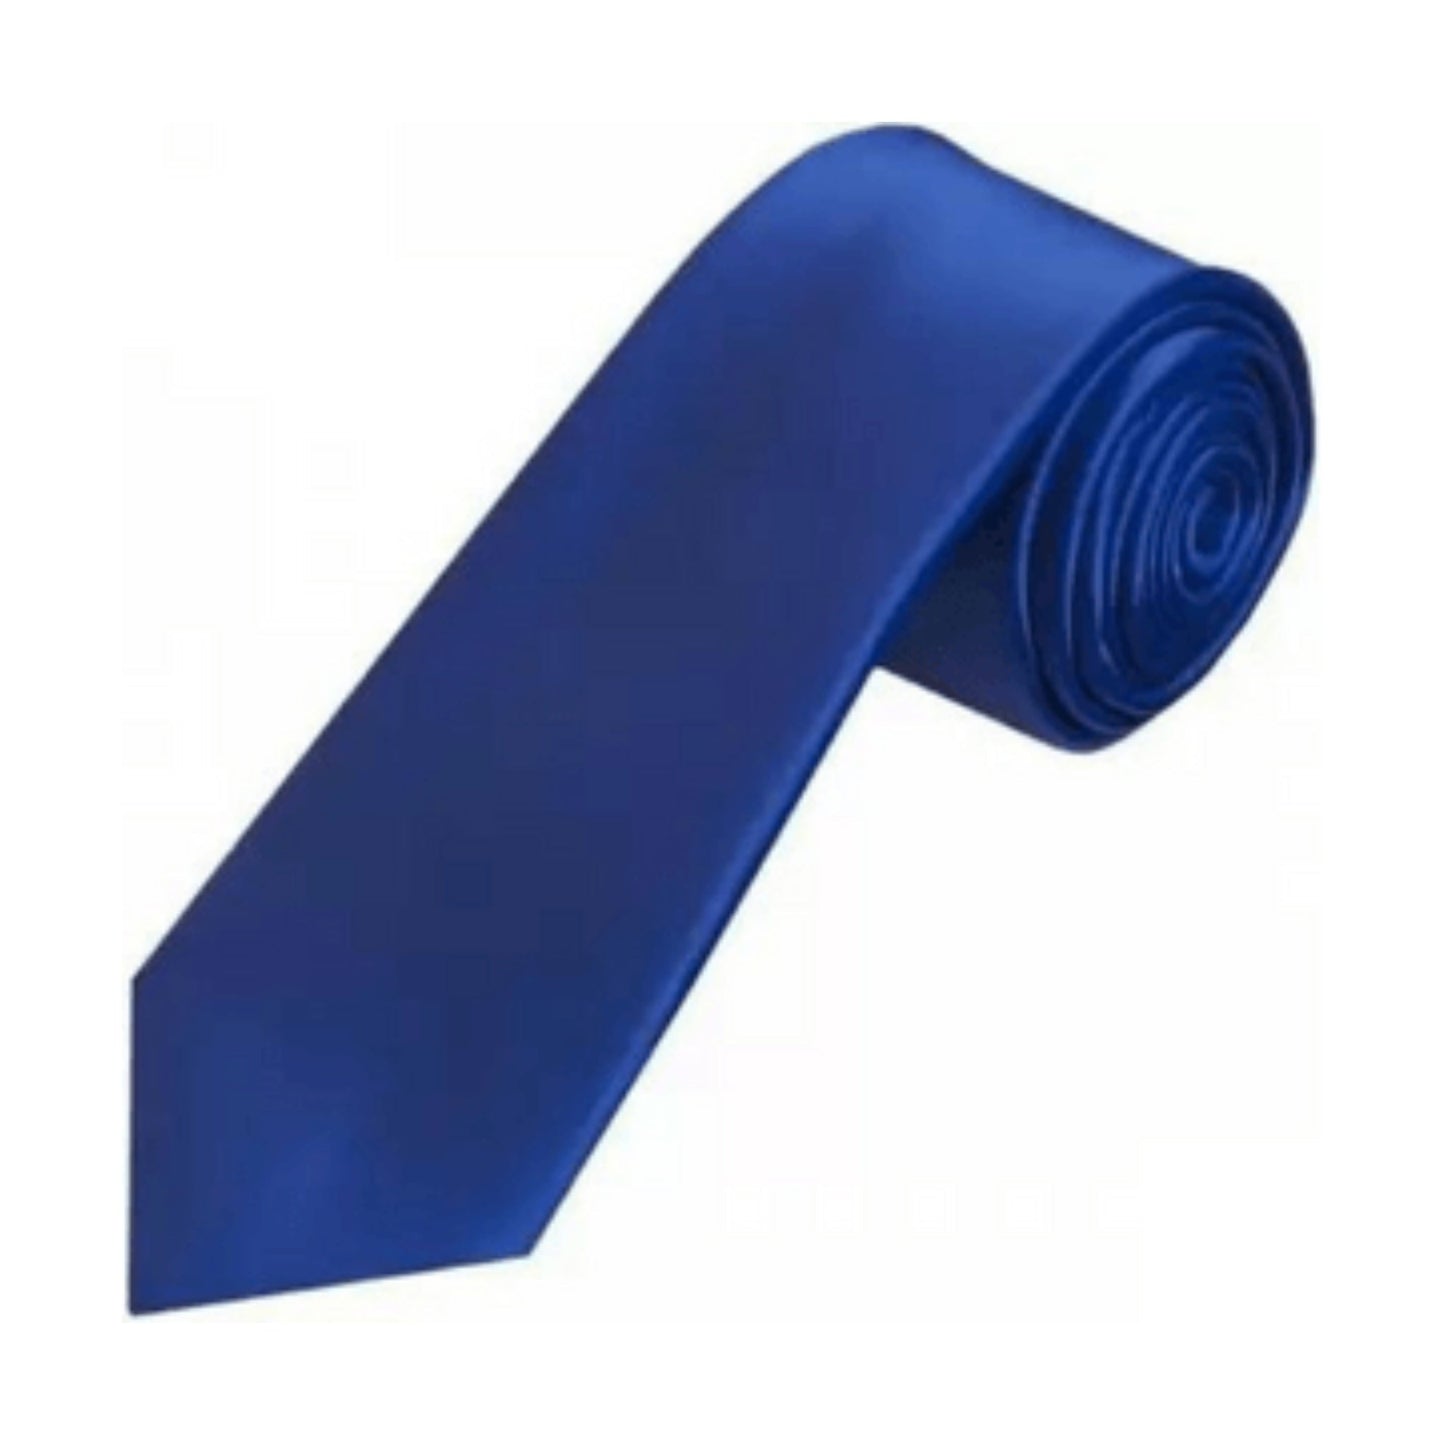 YOUTH ROBE's Neck Tie (Blue) - YOUTH ROBE